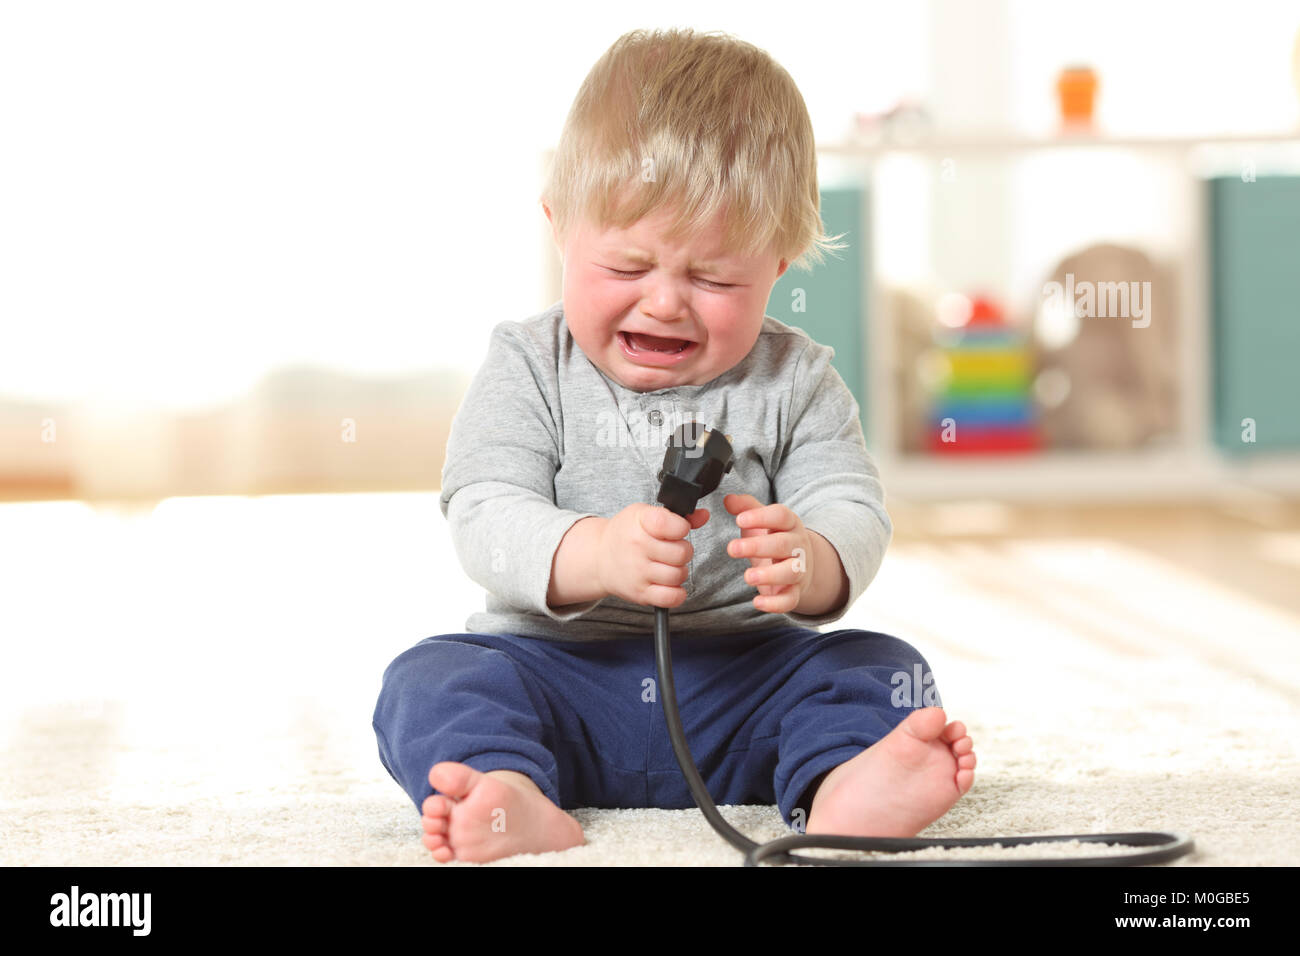 Front view portrait of a baby aby in danger crying holding an an electric plug sitting on the floor at home Stock Photo